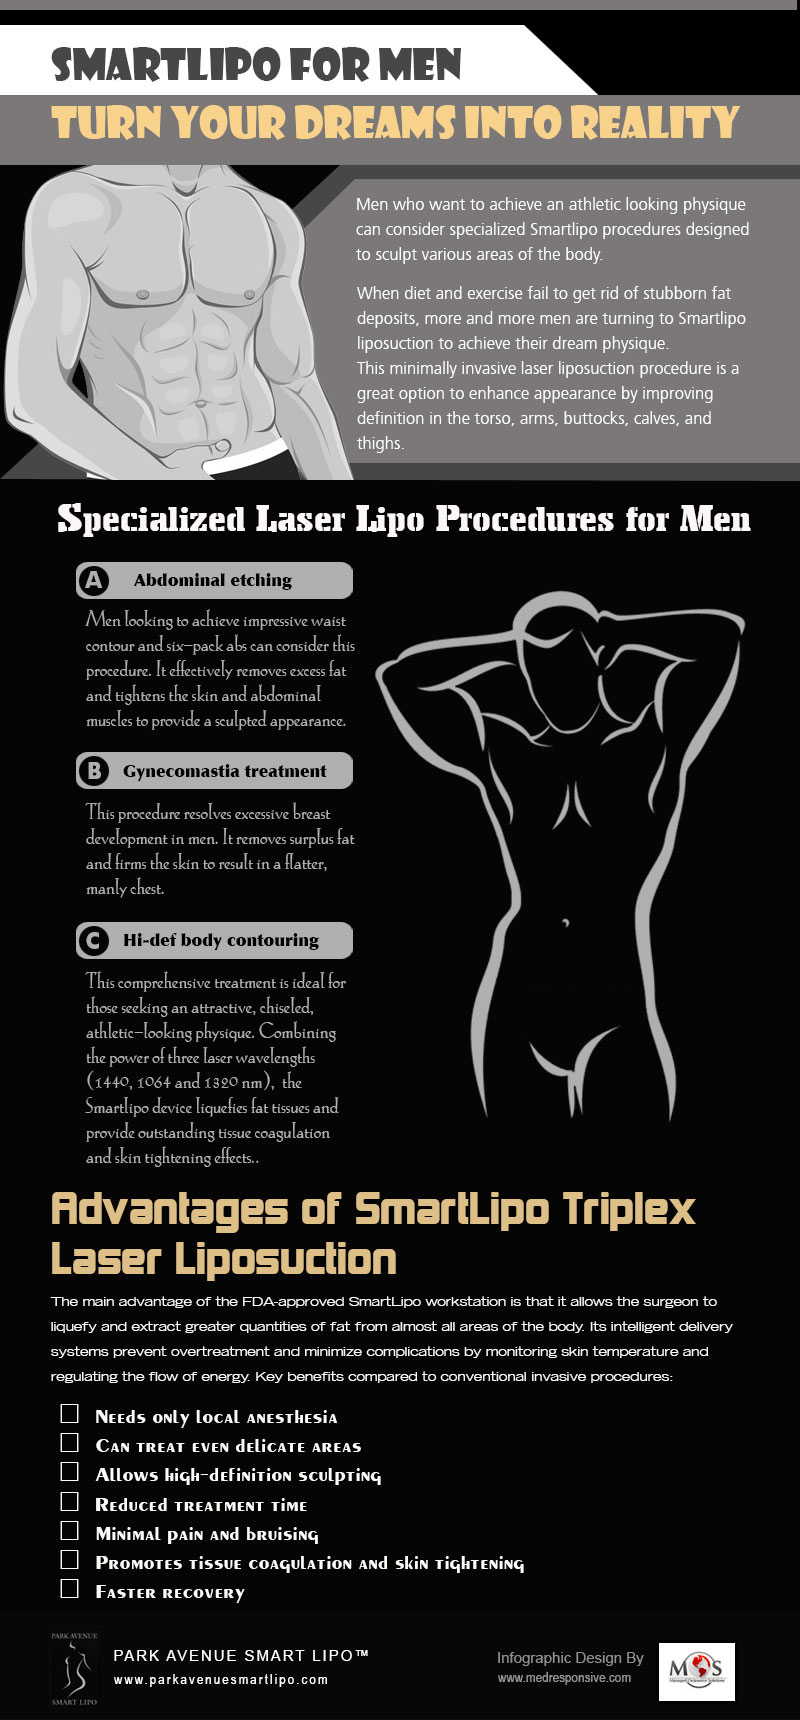 Smartlipo for Men - Turn Body Shaping Dreams into Reality